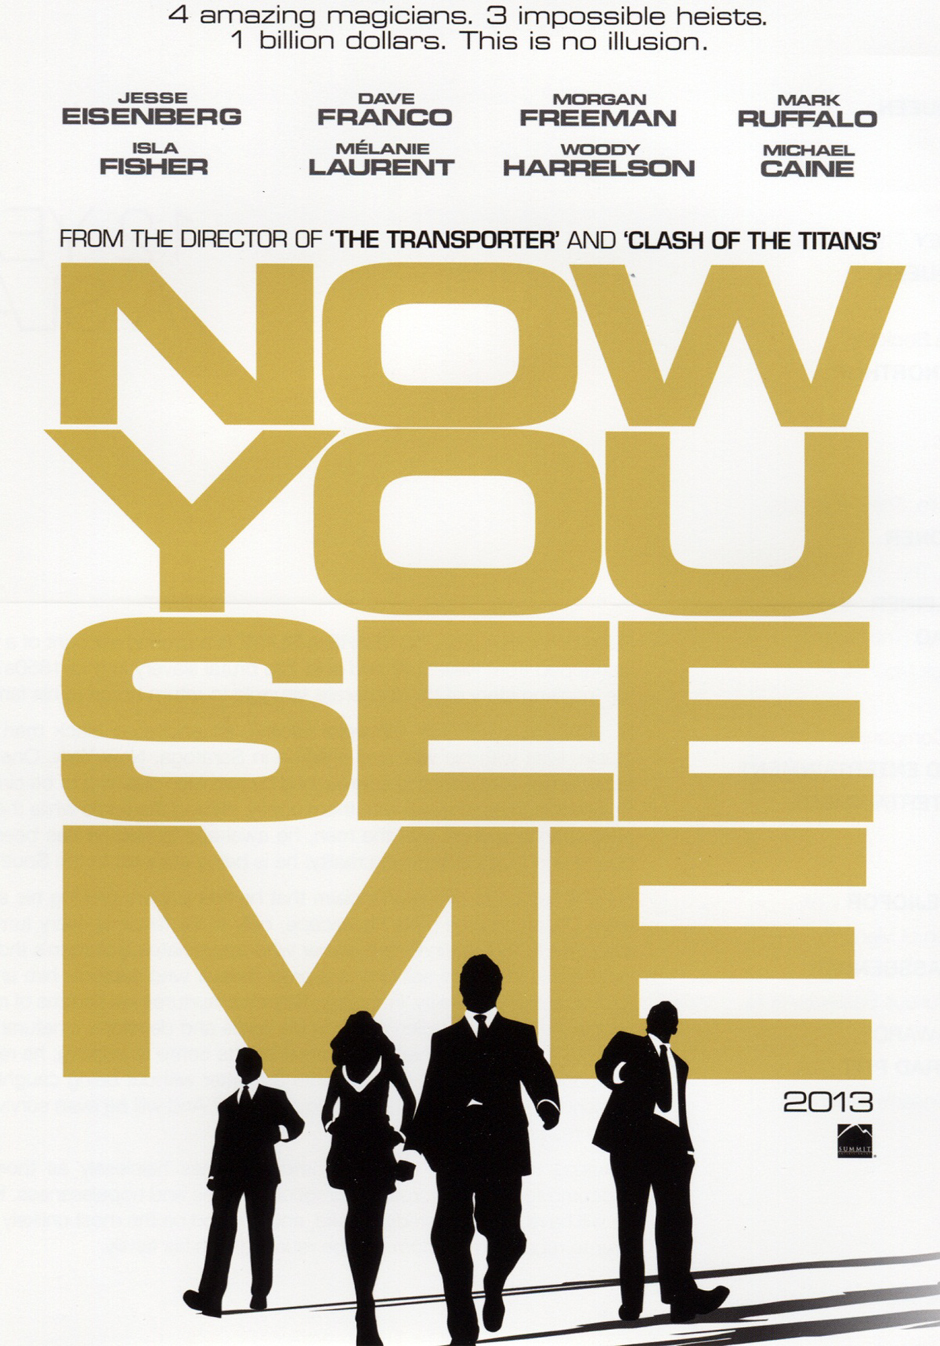 Now You See Me Dvdrip Jaybob